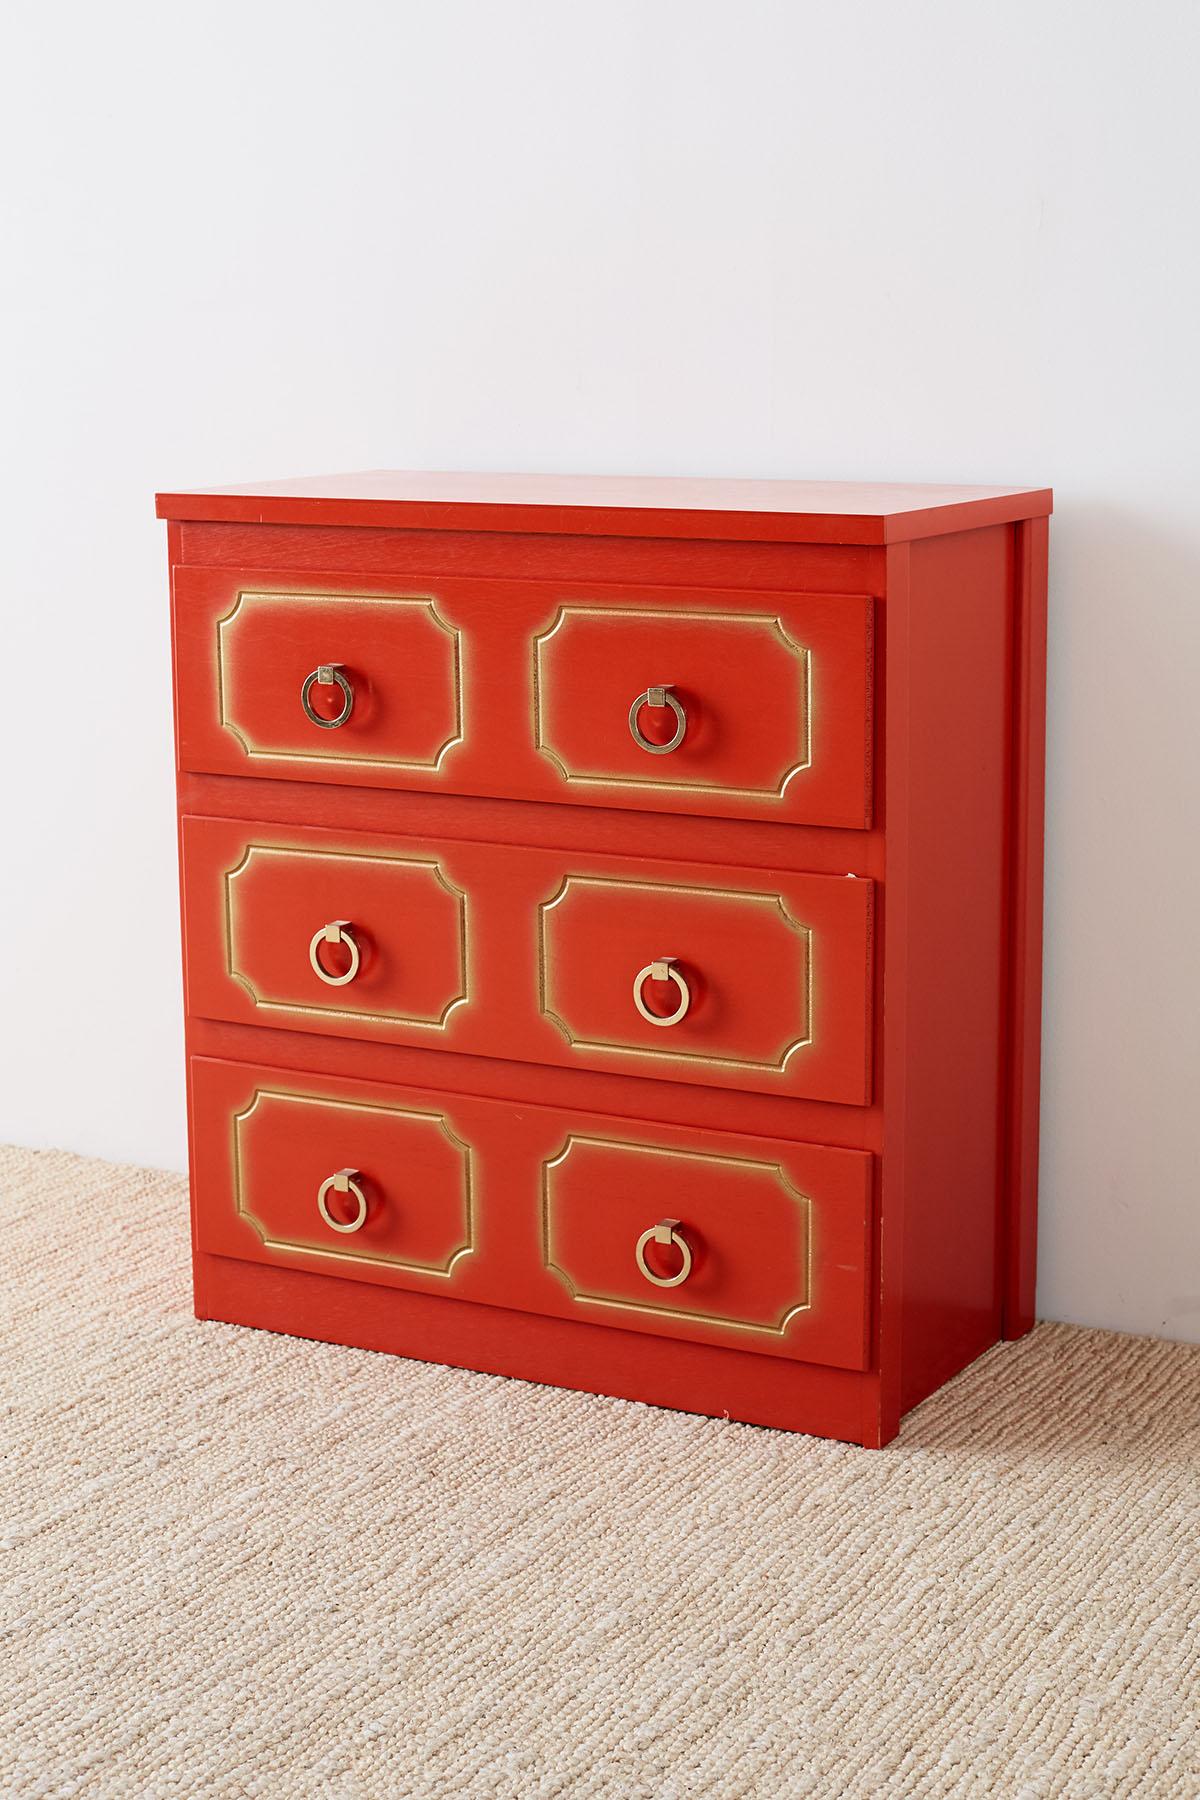 American Dorothy Draper Style Coral Red Commode or Chest